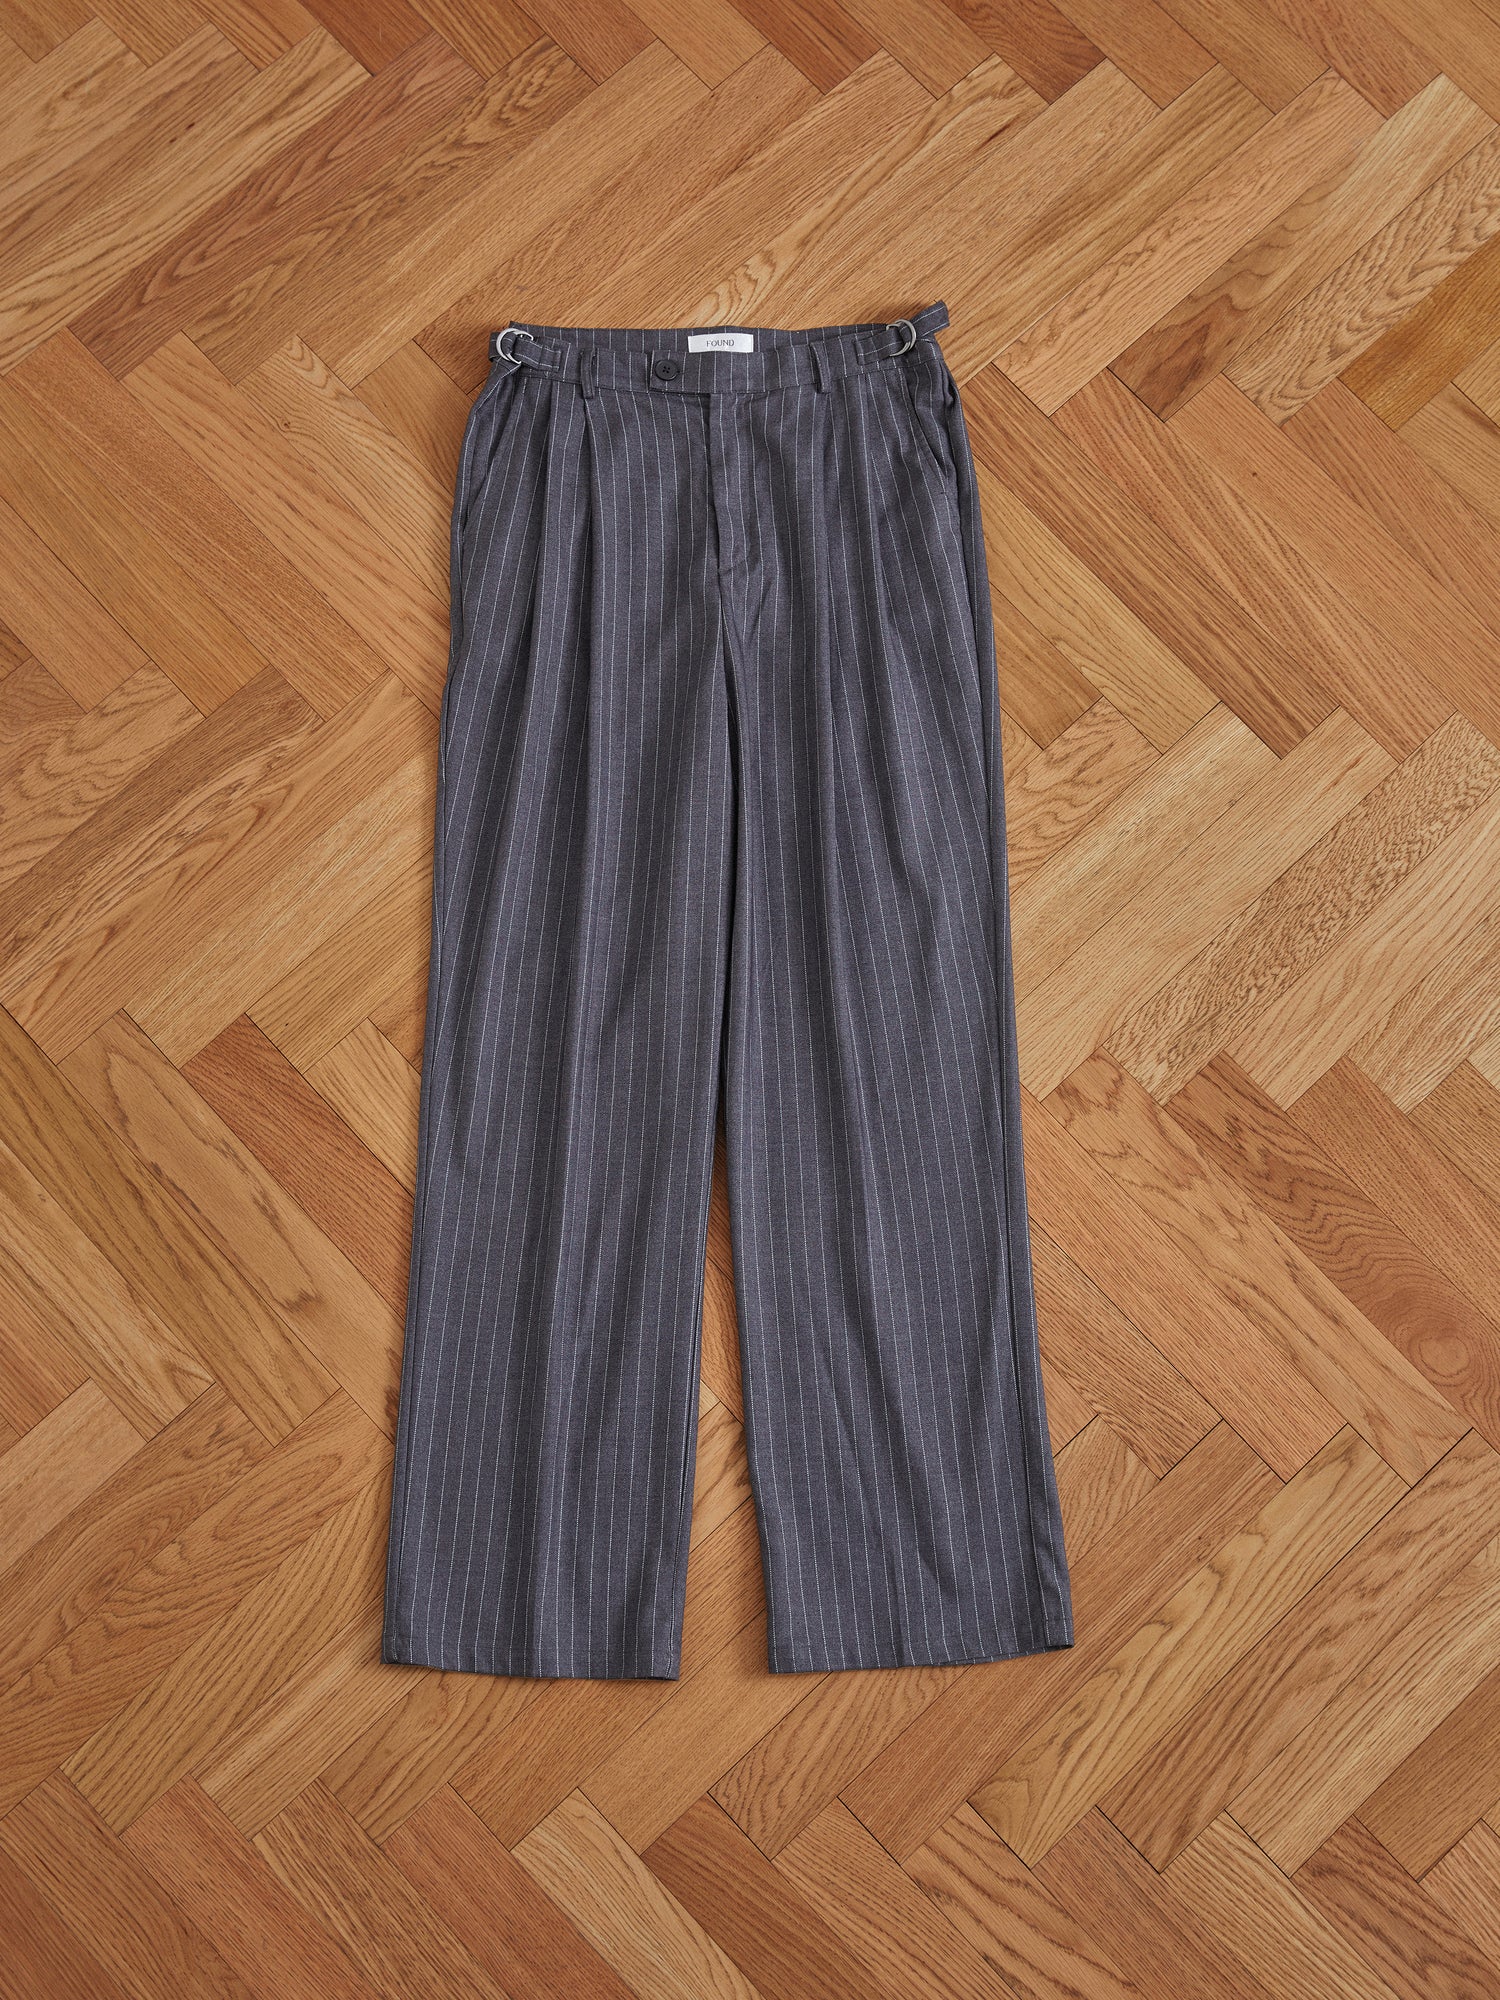 A pair of Found Pinstripe Pleated Trousers on a wooden floor.